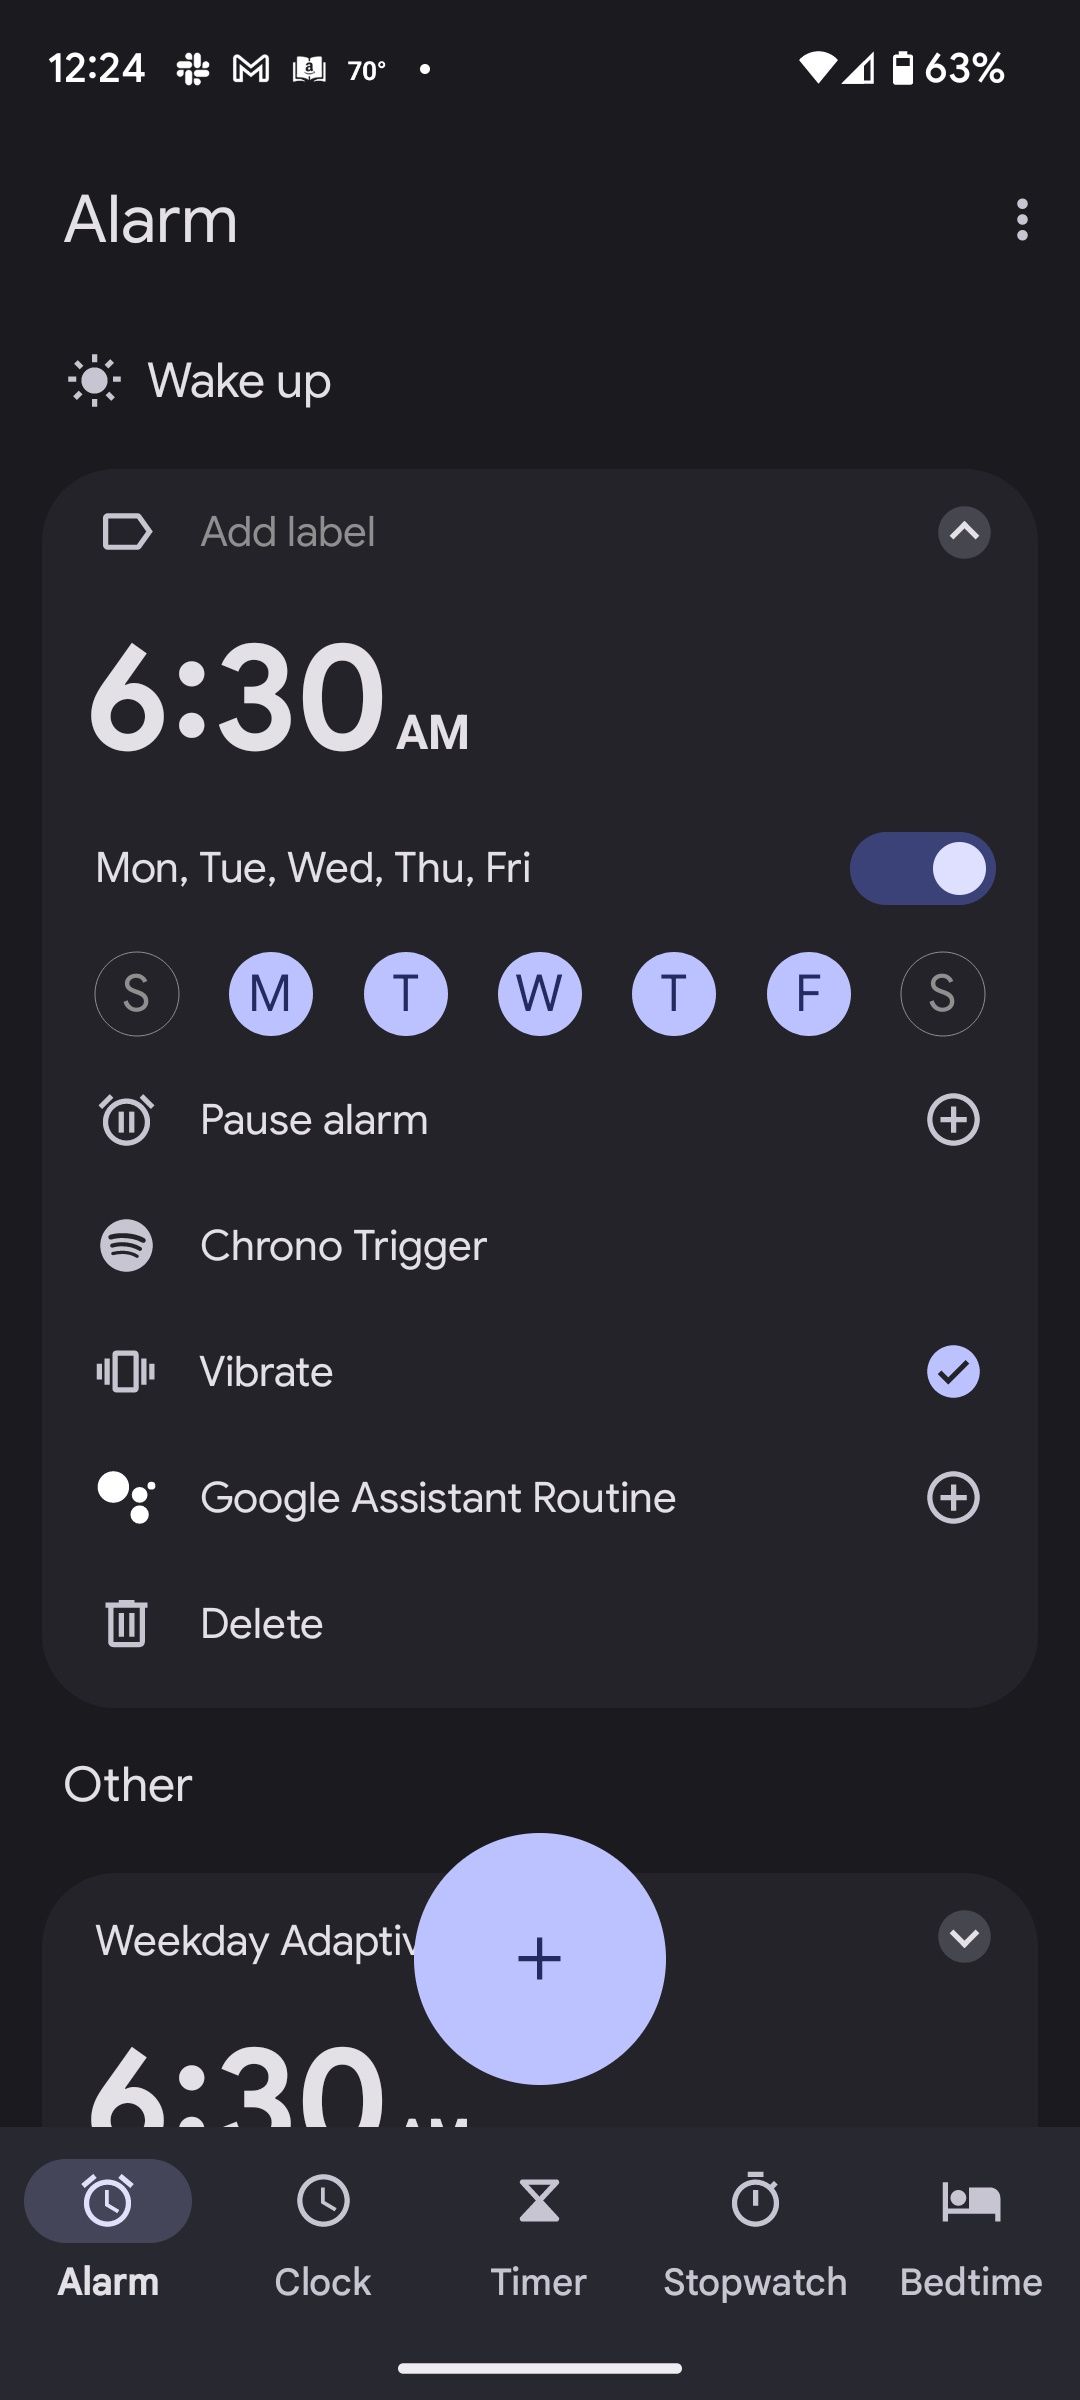 The Alarms page in the Android Clock app